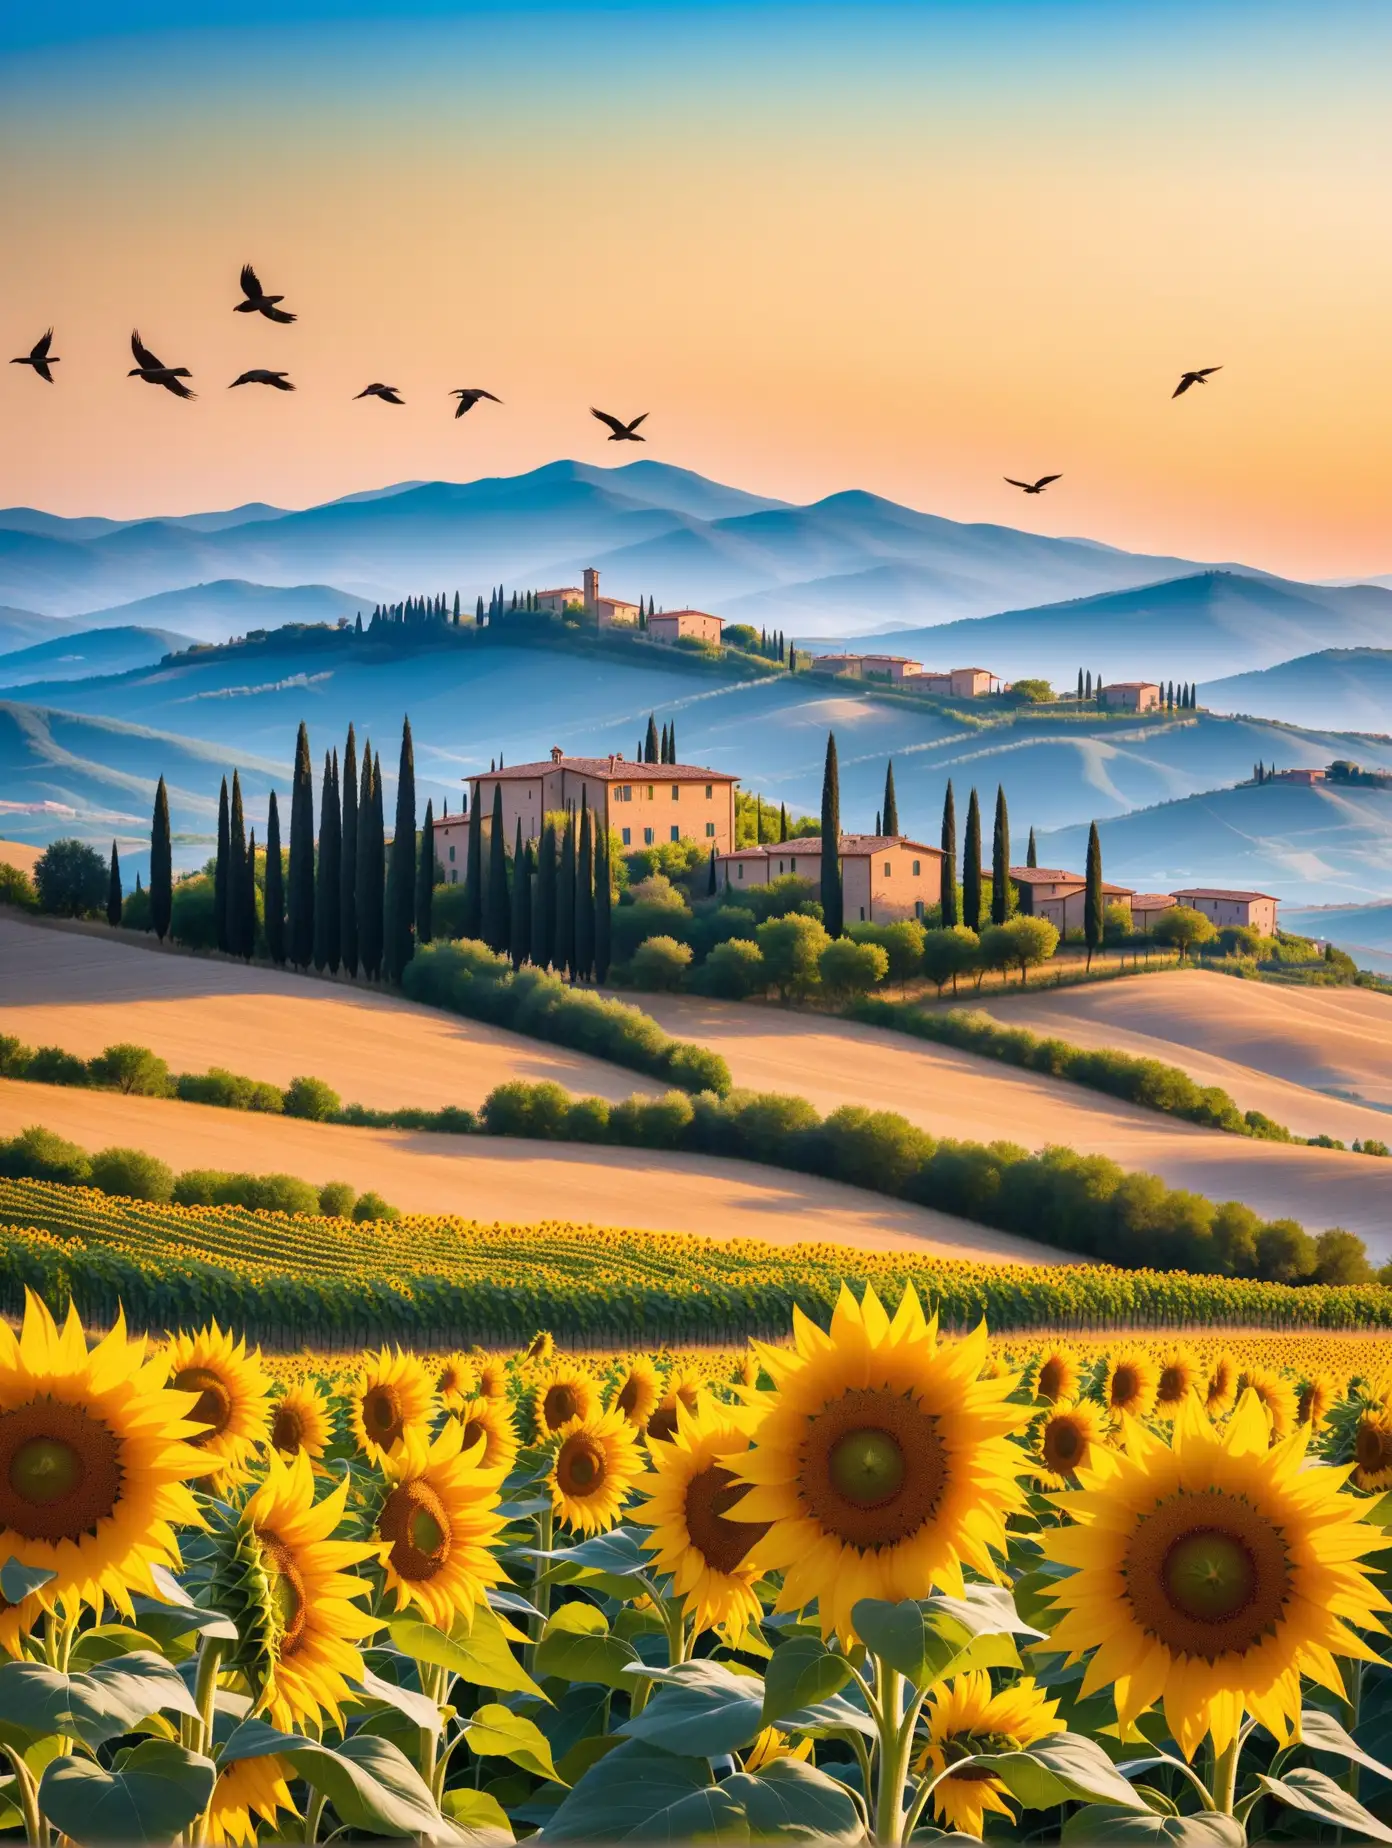 Tuscan Sunflower Fields Beneath Majestic Mountains with Soaring Birds